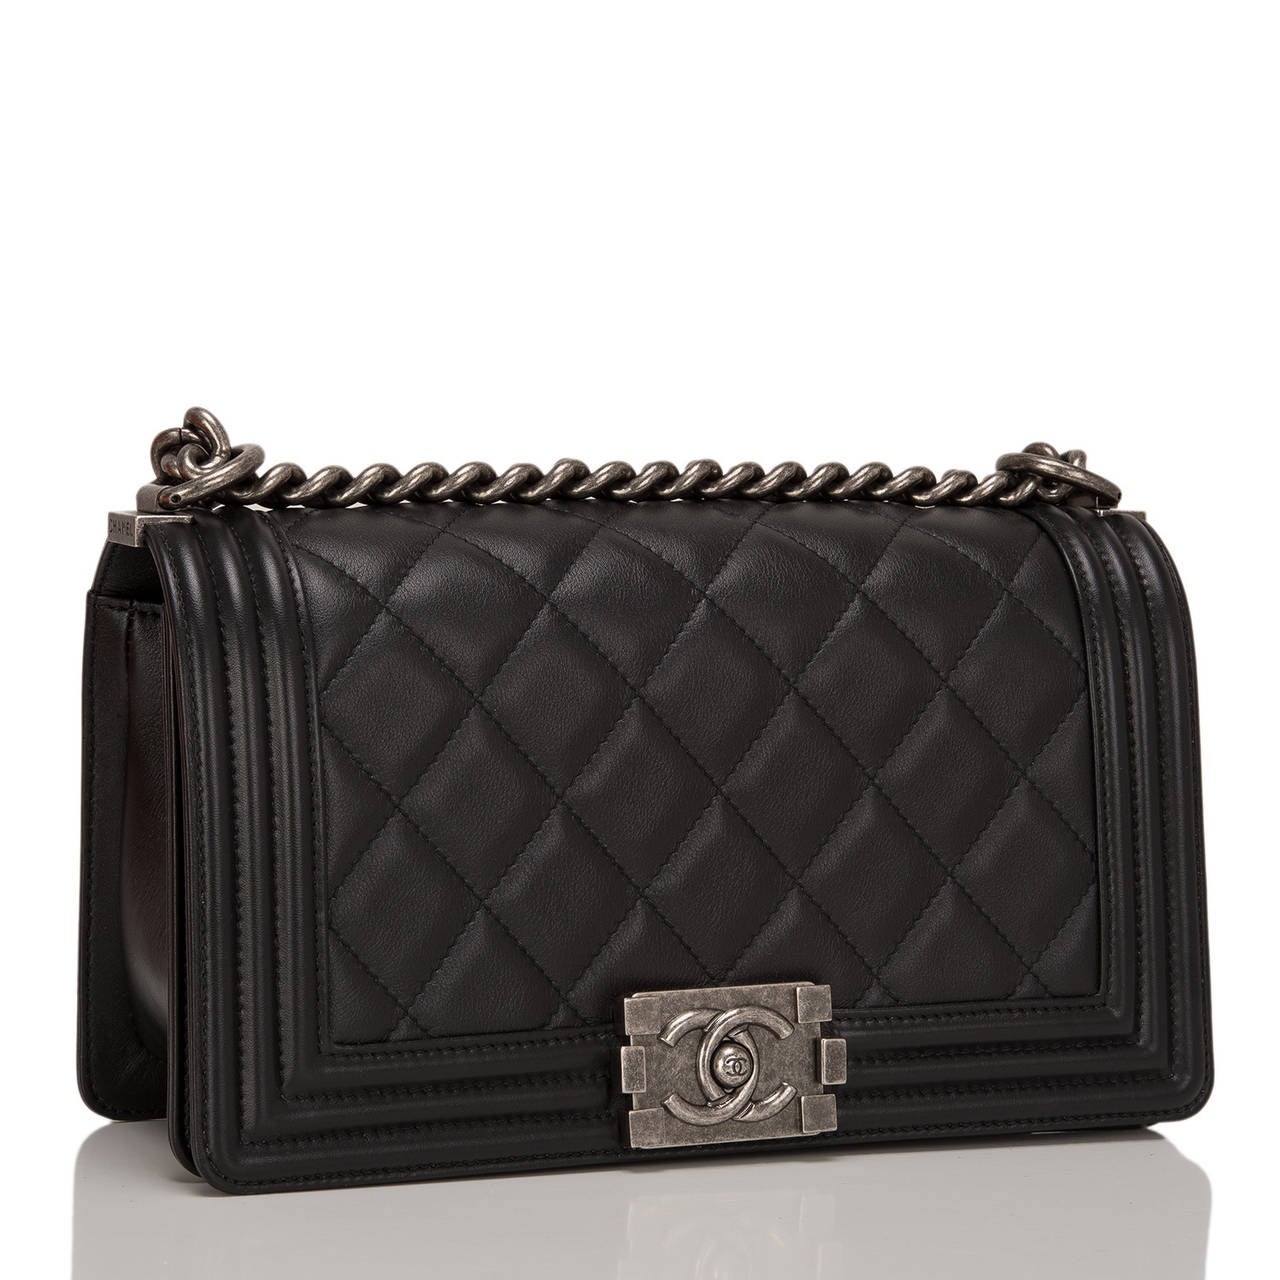 This New Medium Boy bag marries black quilted calfskin leather with aged ruthenium hardware. The bag is of quilted leather trimmed in smooth leather with smooth leather sides and bottom, a full front flap with the Boy Chanel signature CC push lock